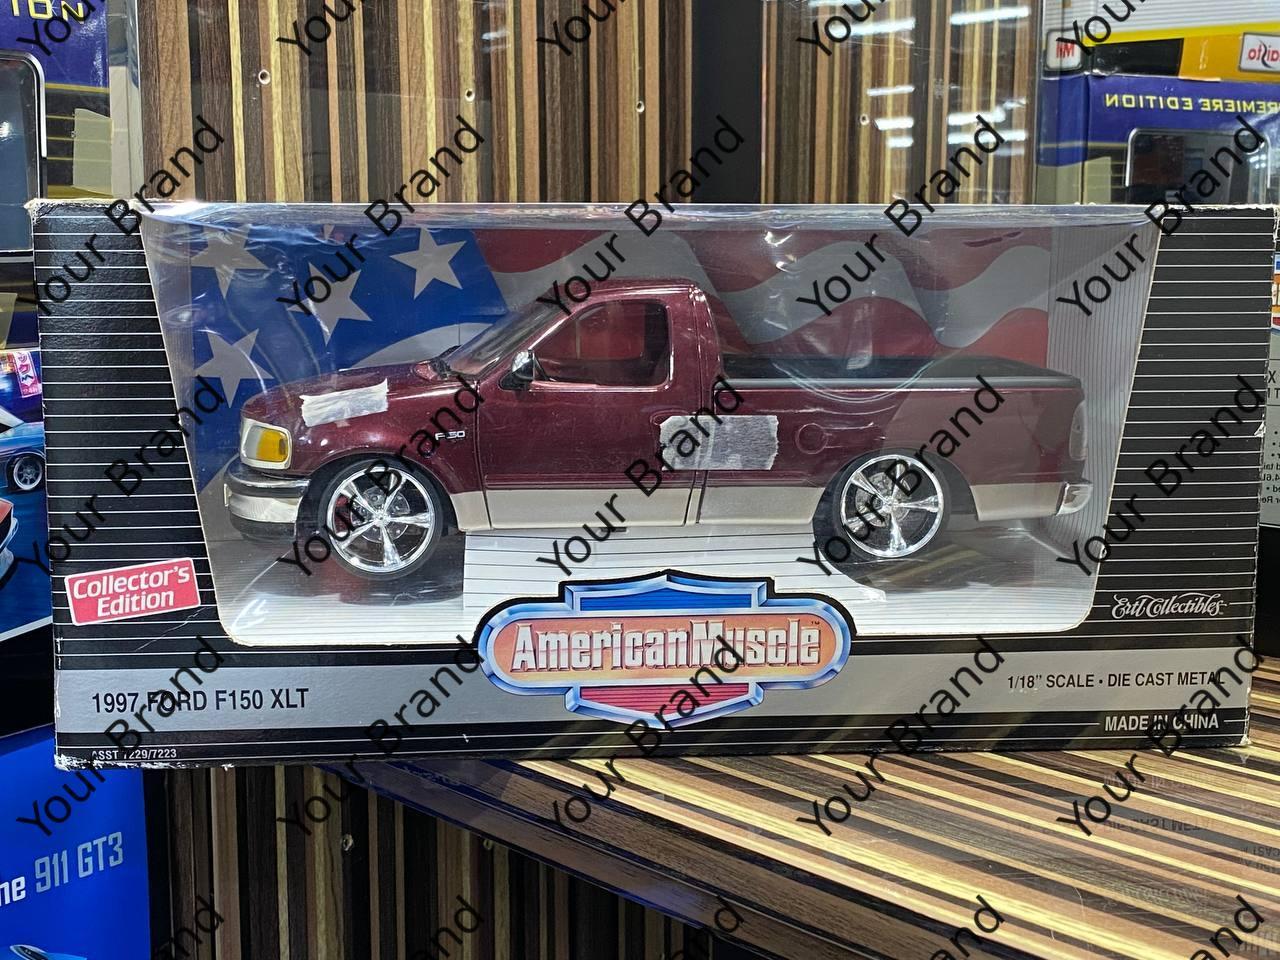 1/18 Diecast Ford F-150 XLT 1997 Ertl Collectibles Scale Model Car